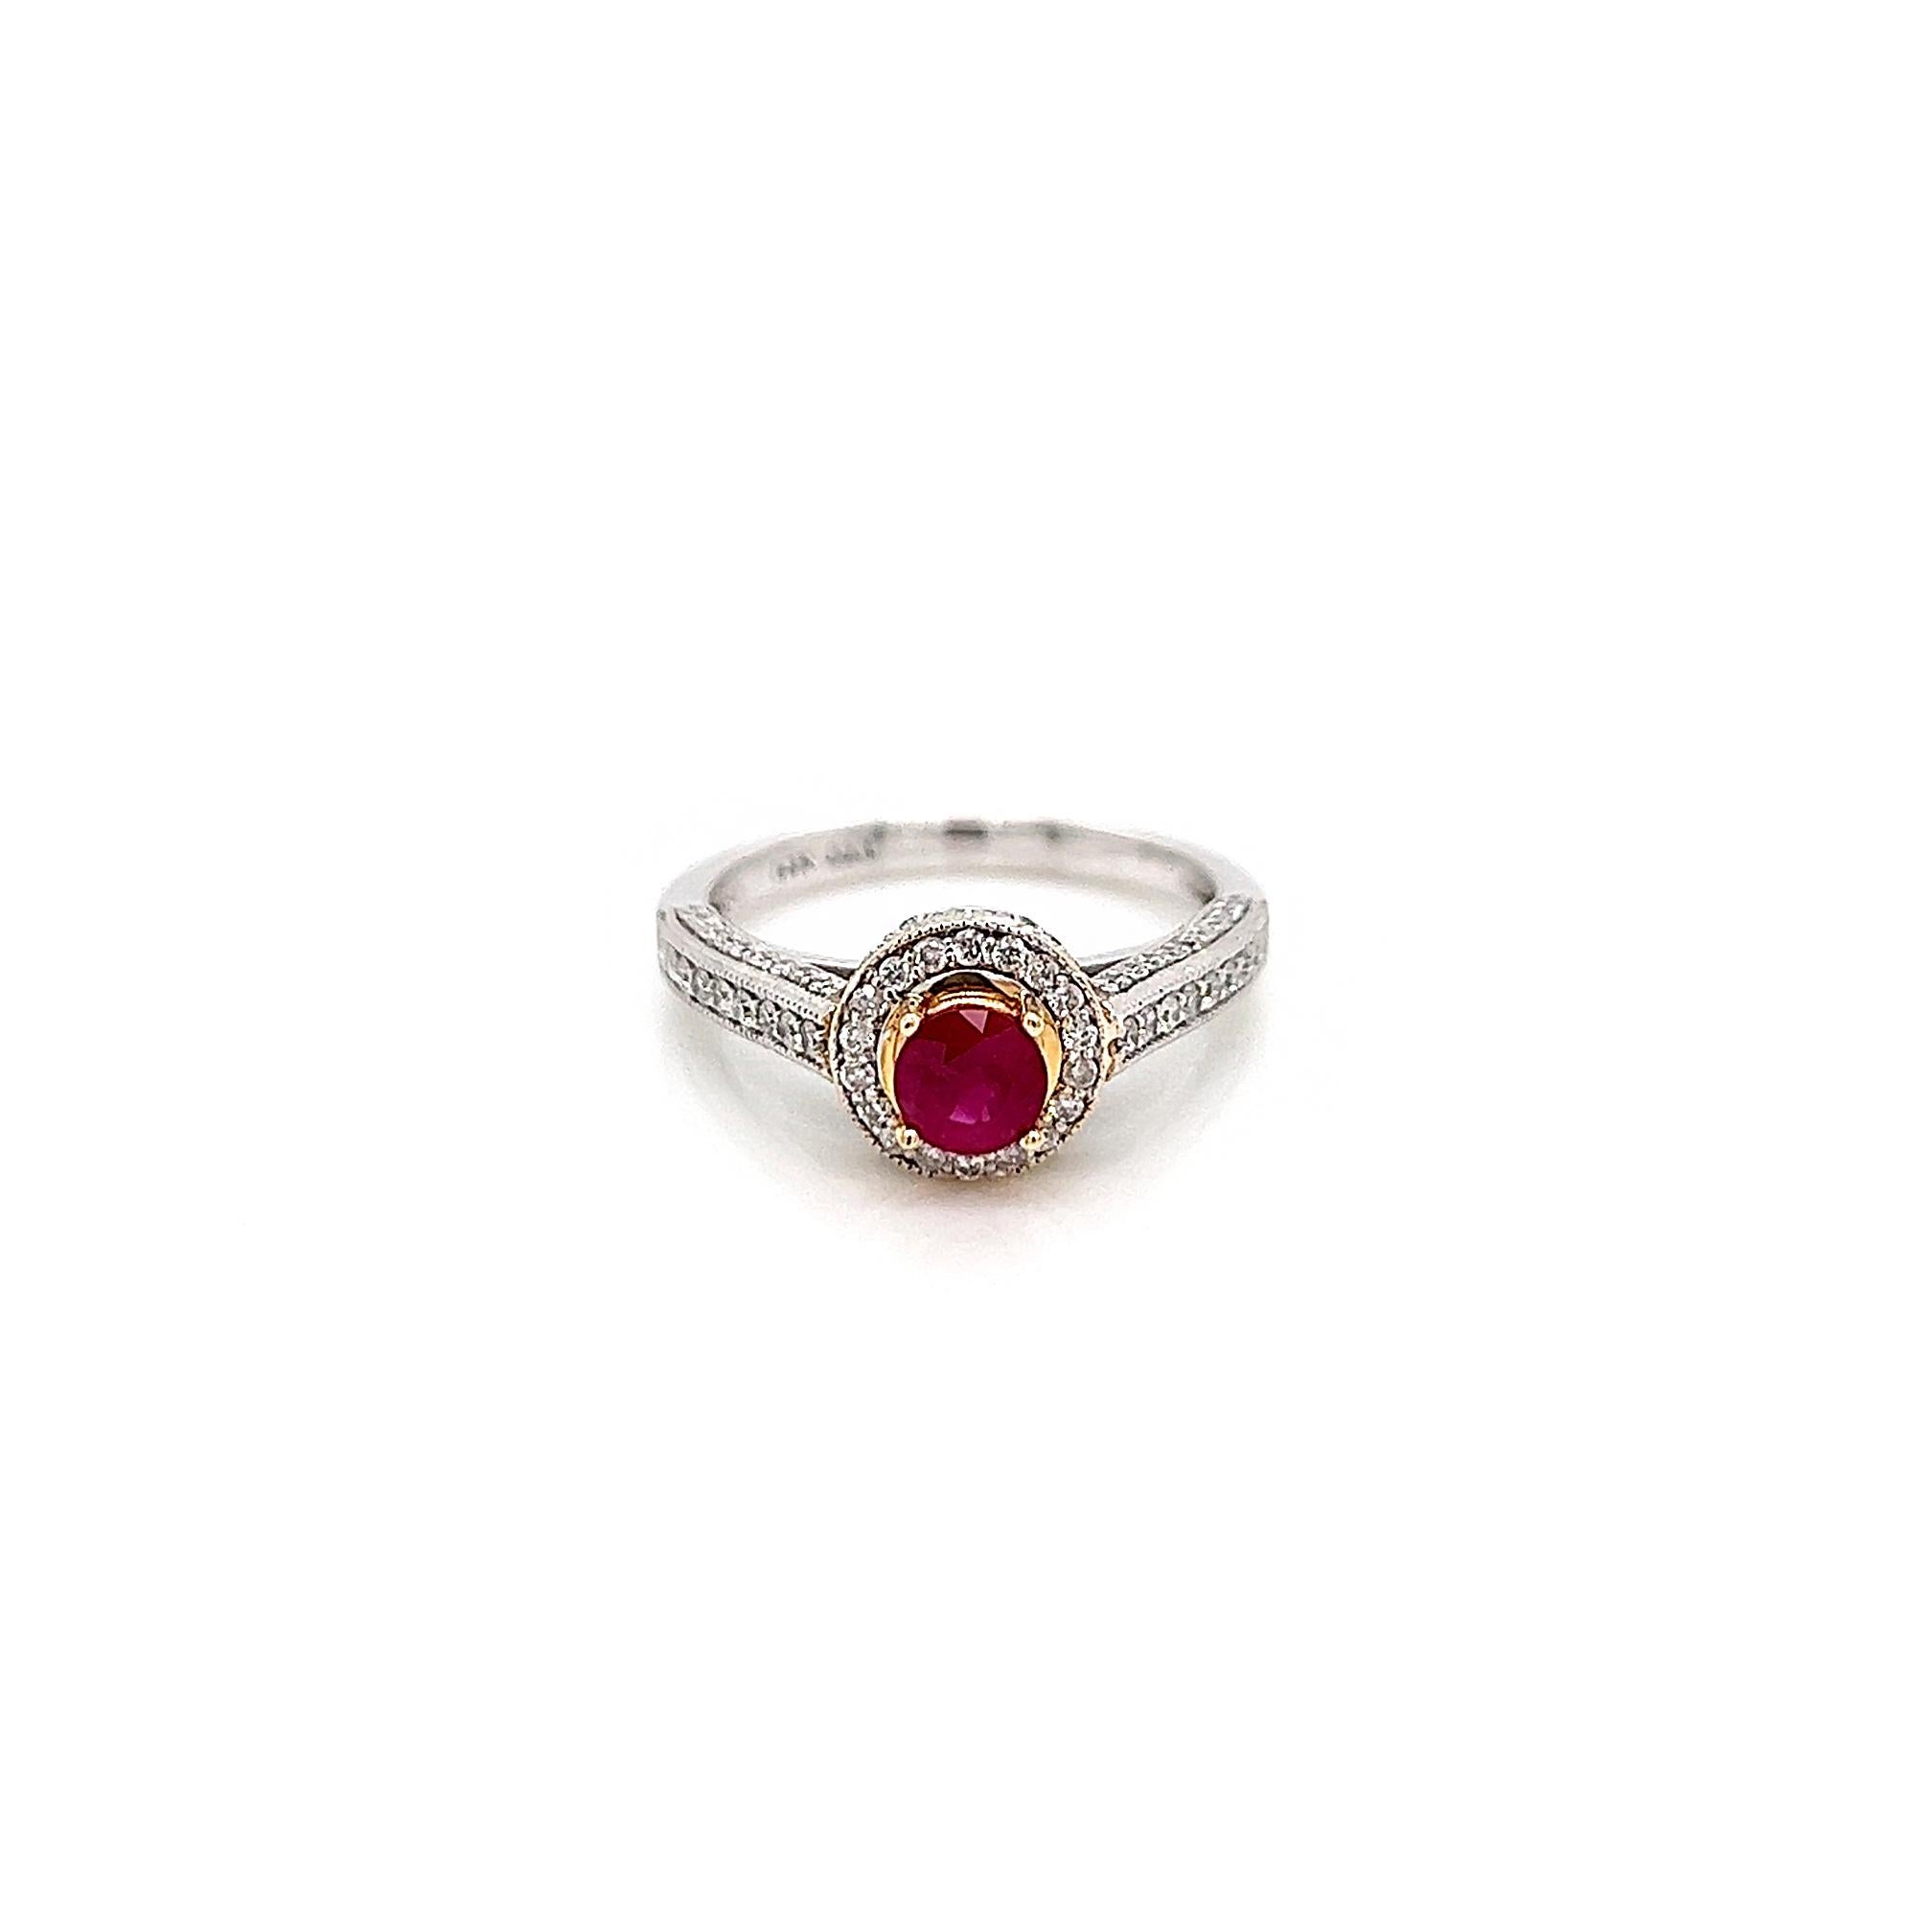 This petite vintage ring is in wonderful, wearable condition. It is a 6.75 US, but can be sized by our expert jewelers to suit your needs. We only have one of this unique ring, which will be fully inspected by our jewelers before shipping to make